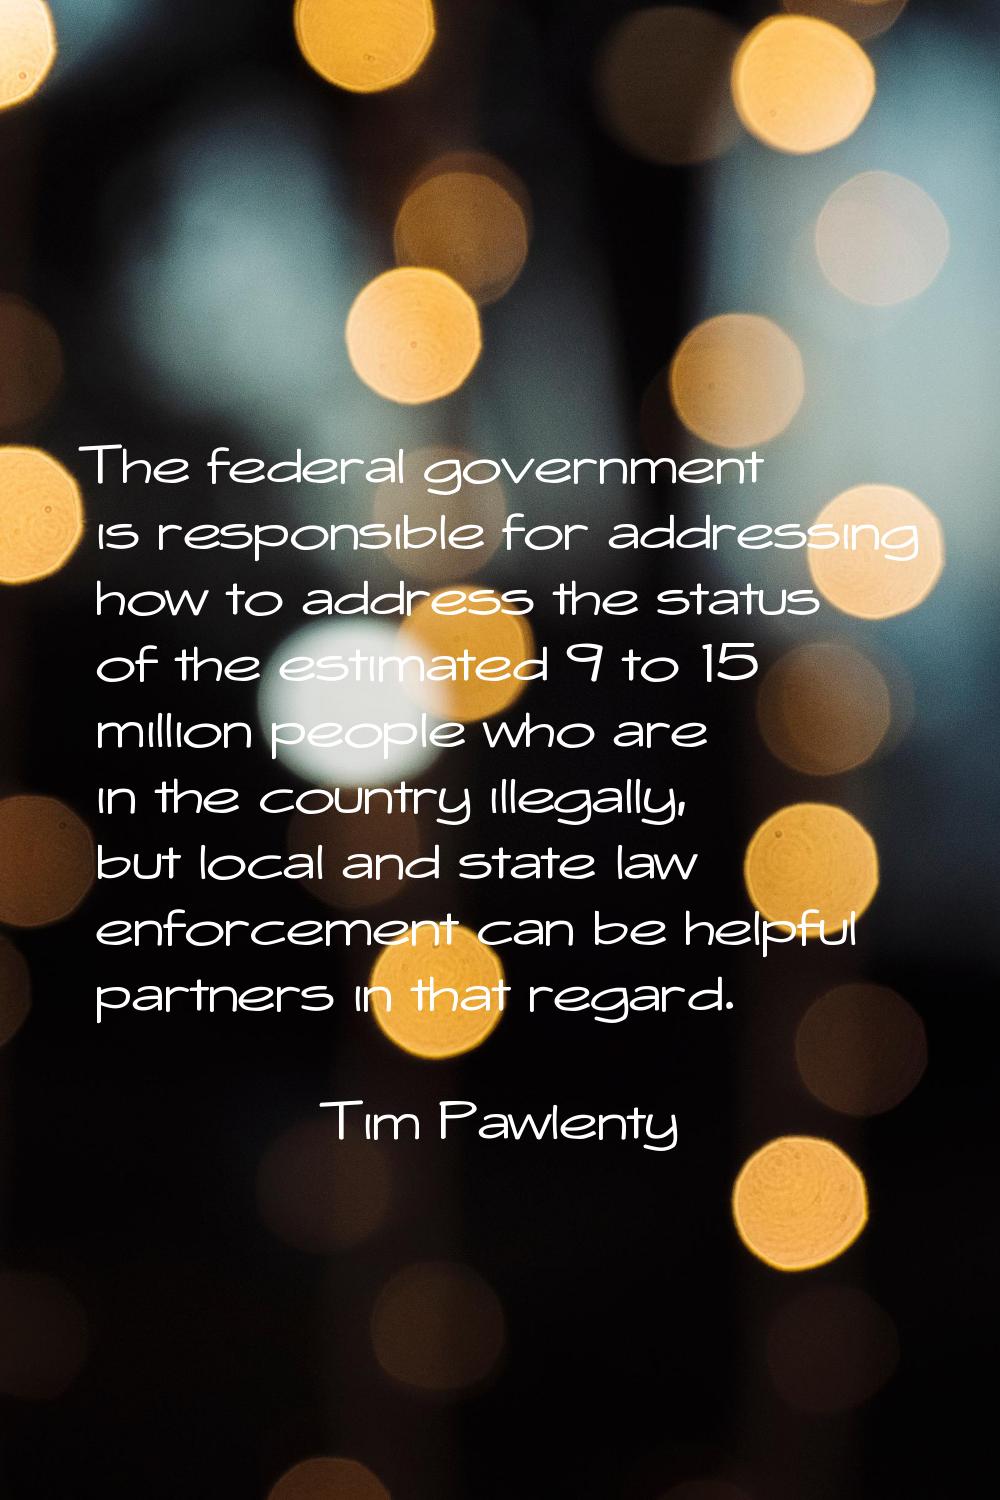 The federal government is responsible for addressing how to address the status of the estimated 9 t